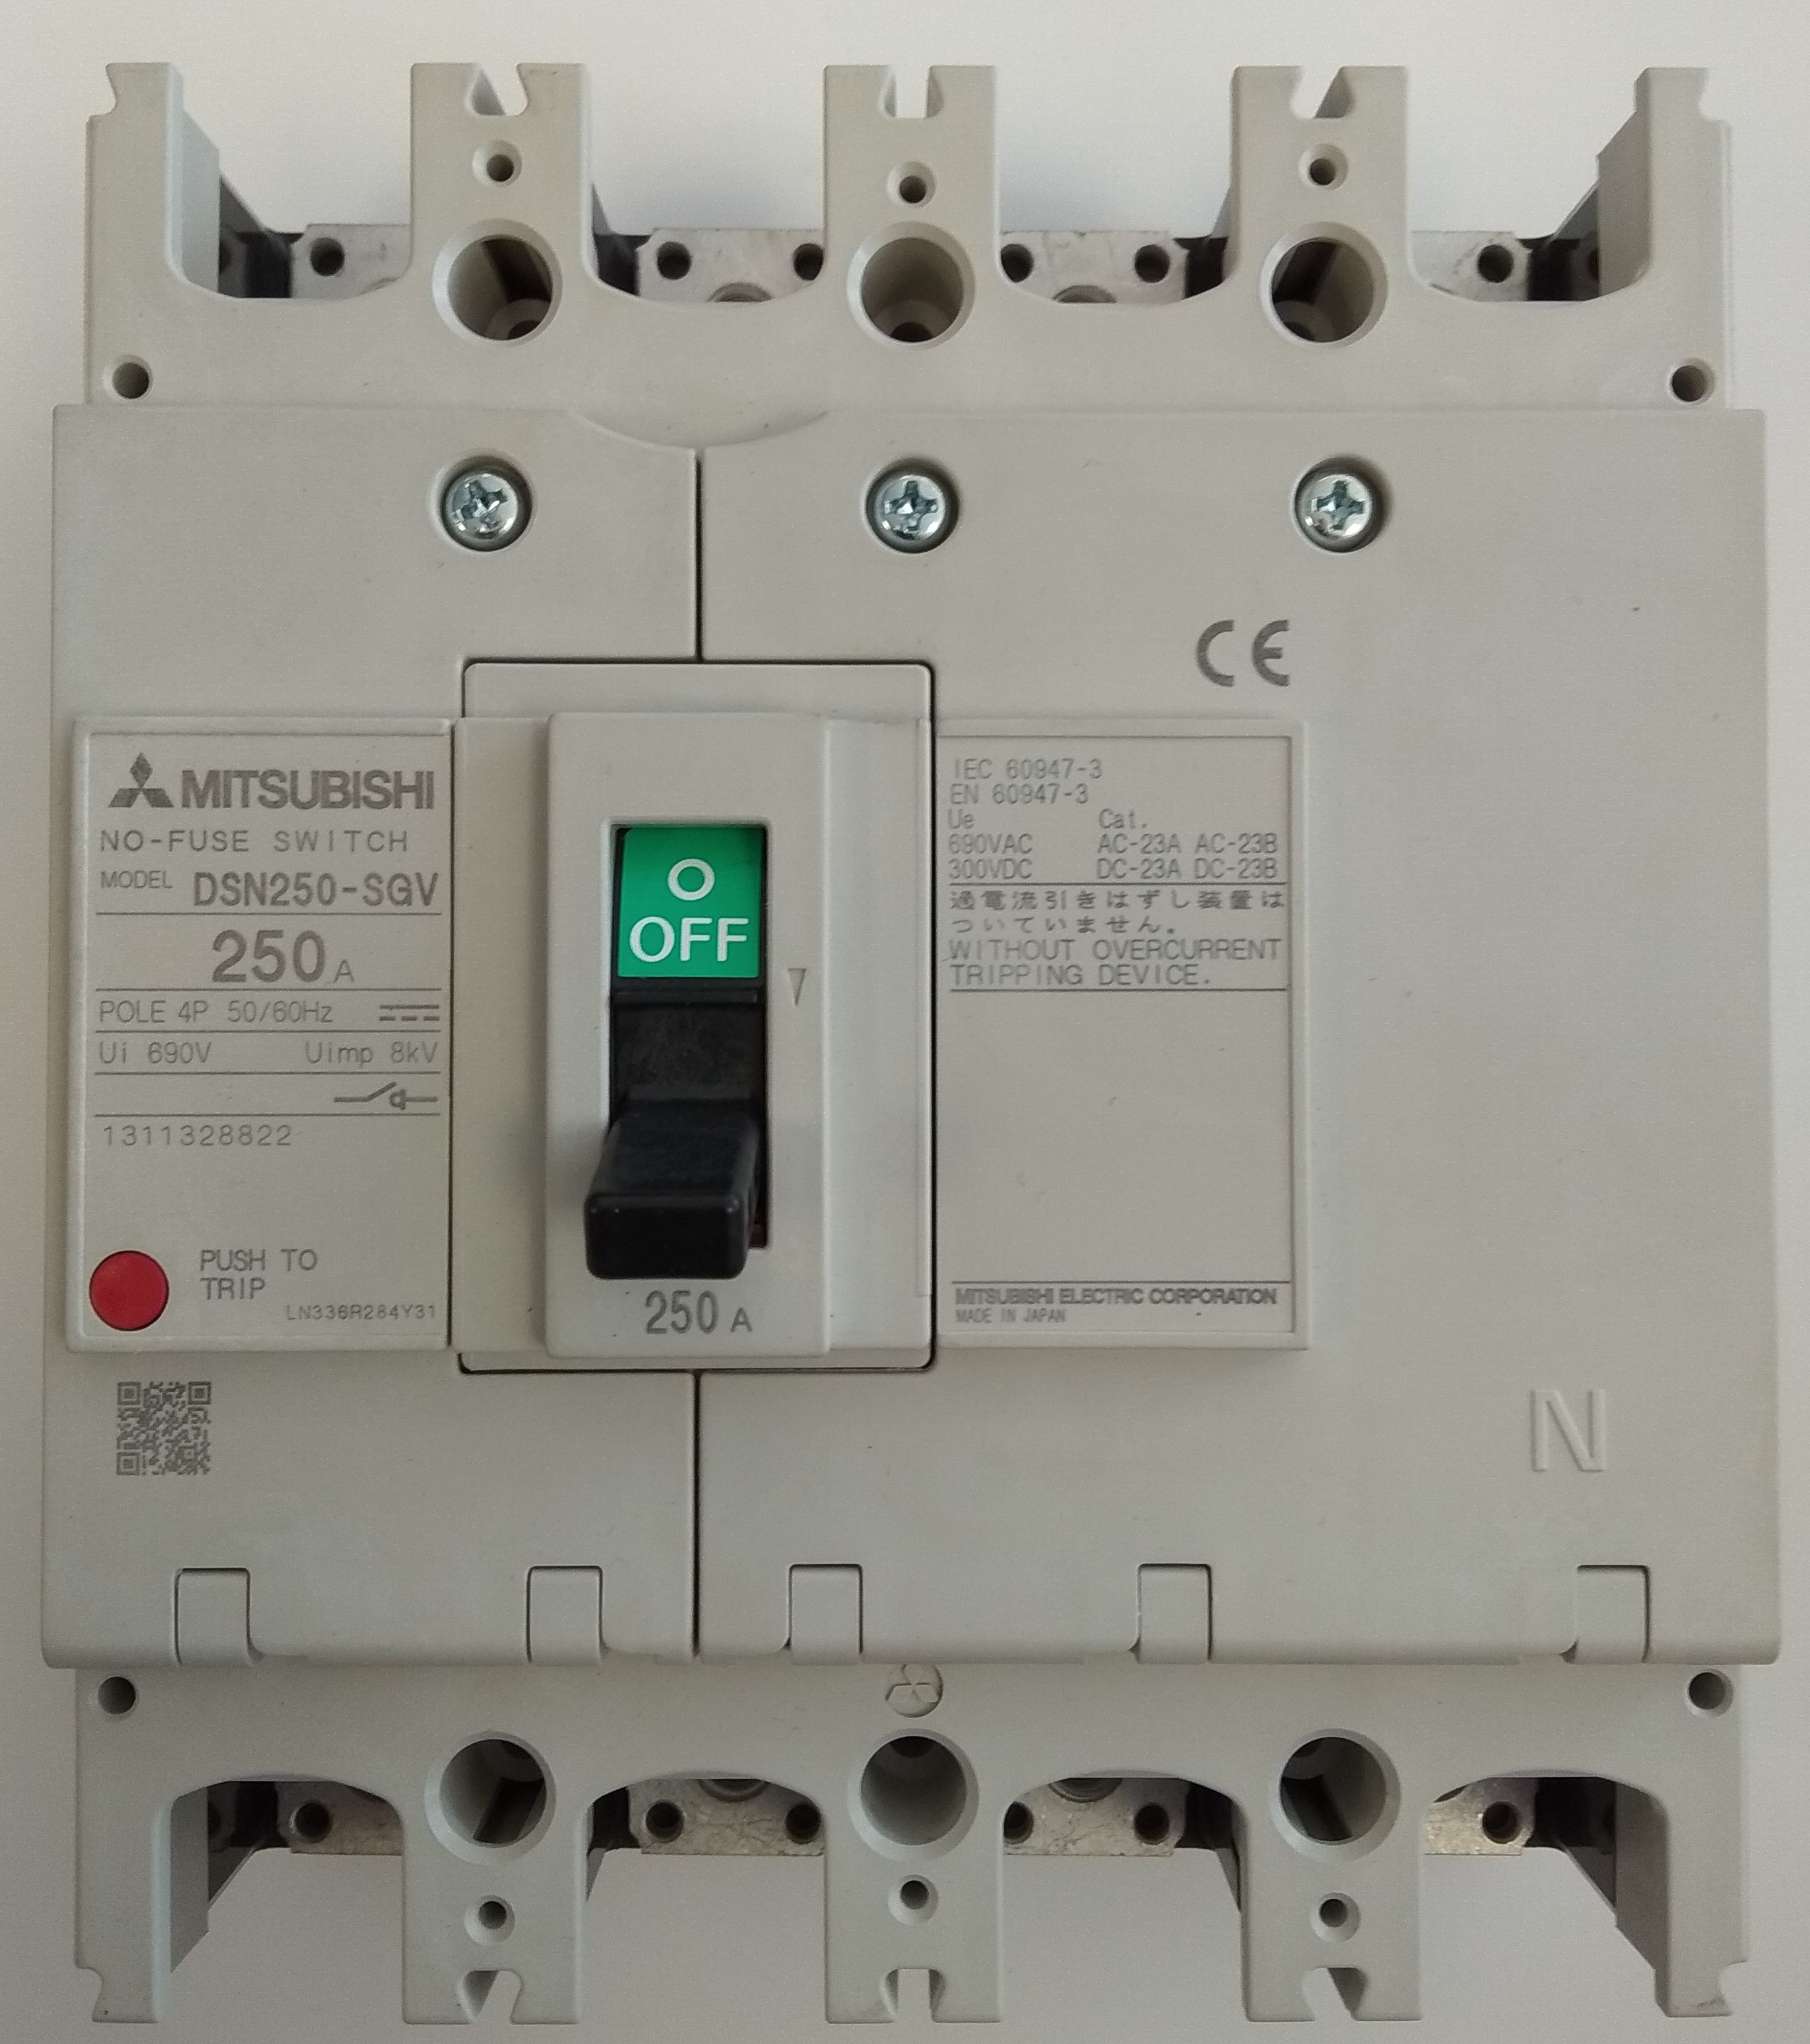 Mitsubishi DSN250-SGV 4P 250A Switch-disconnector